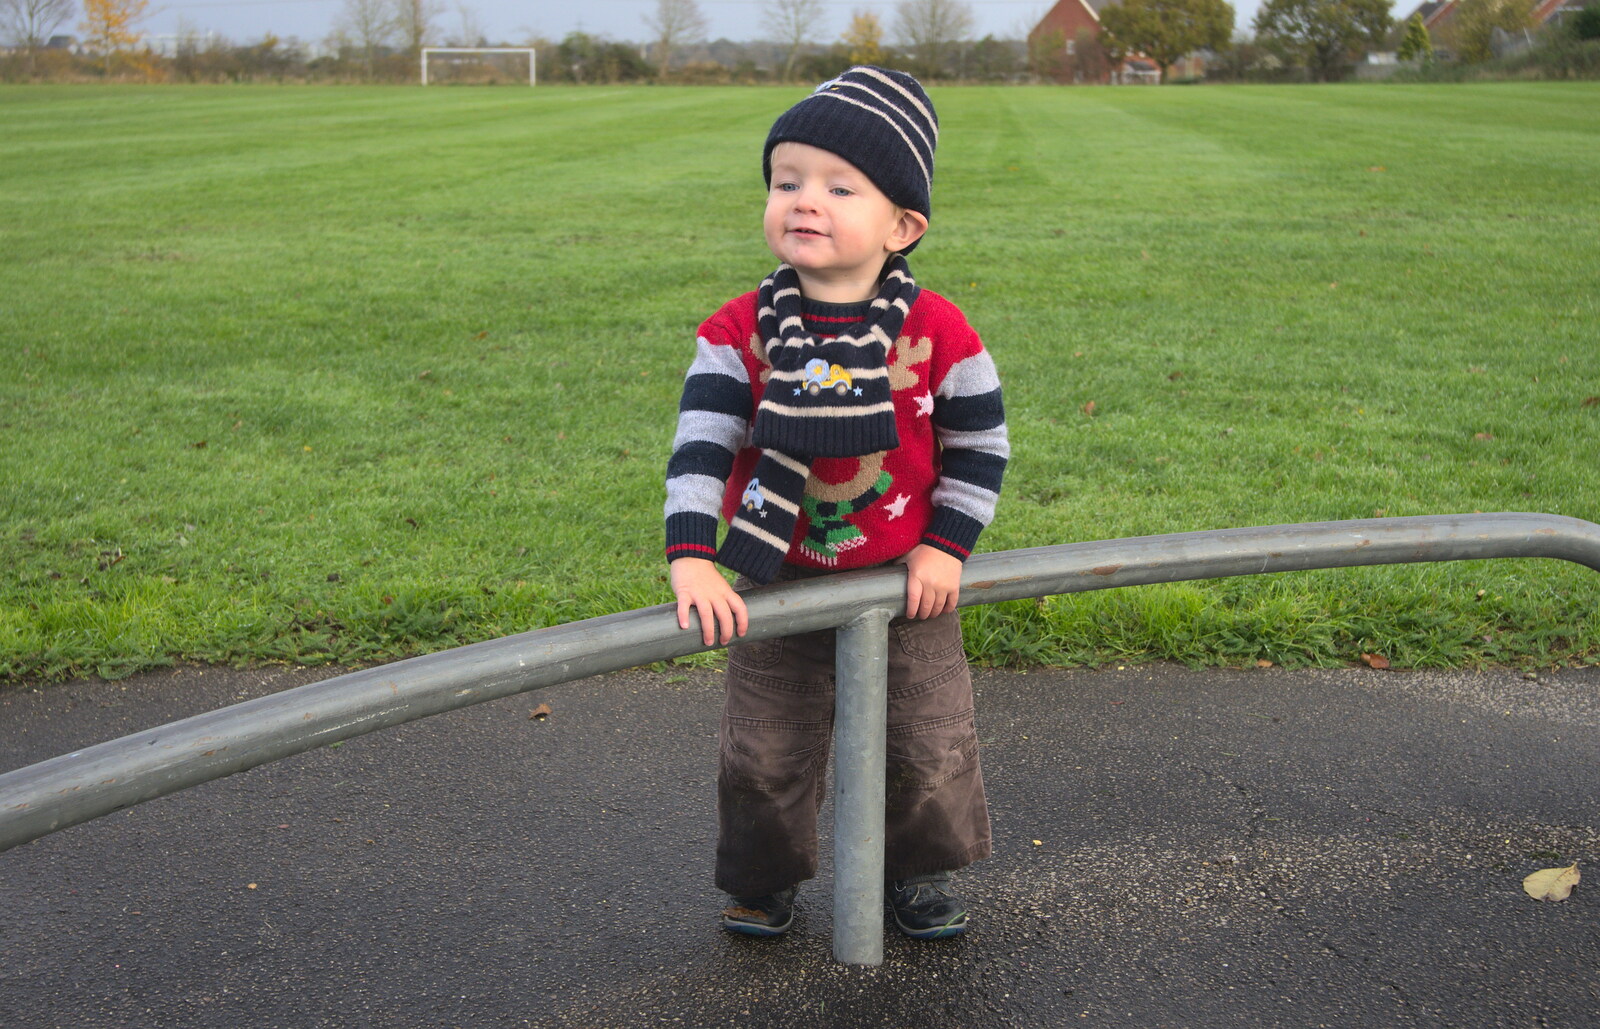 More Building and Palgrave Playground, Suffolk - 24th November 2013: Harry roams around looking cheeky